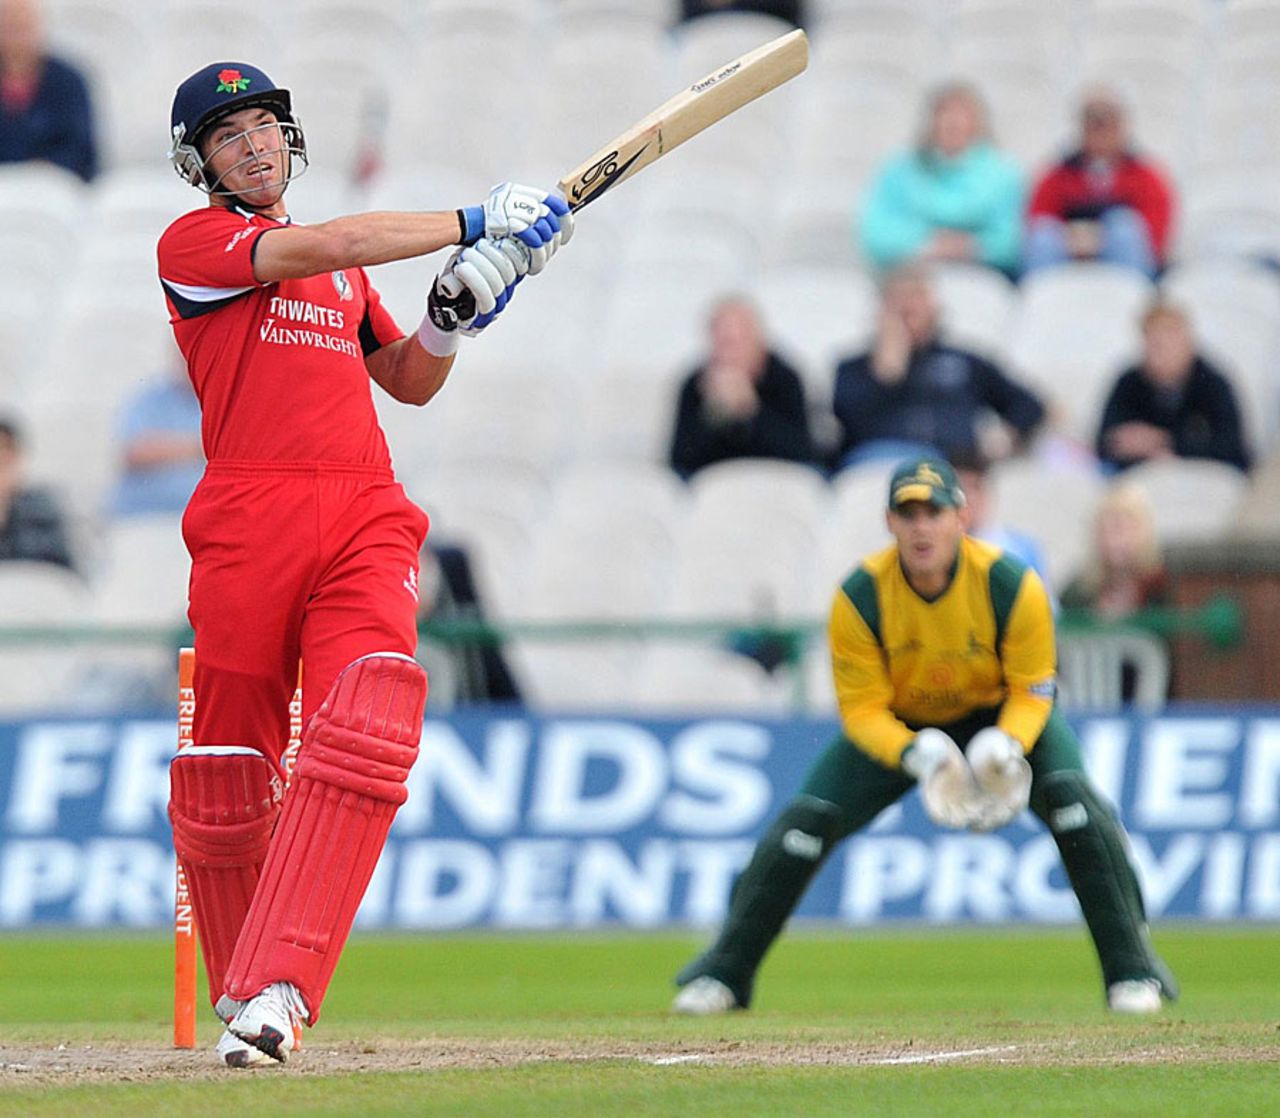 Stephen Moore hits out during his unbeaten 51, Lancashire v Nottinghamshire, Friends Provident t20, Old Trafford, July 14, 2010